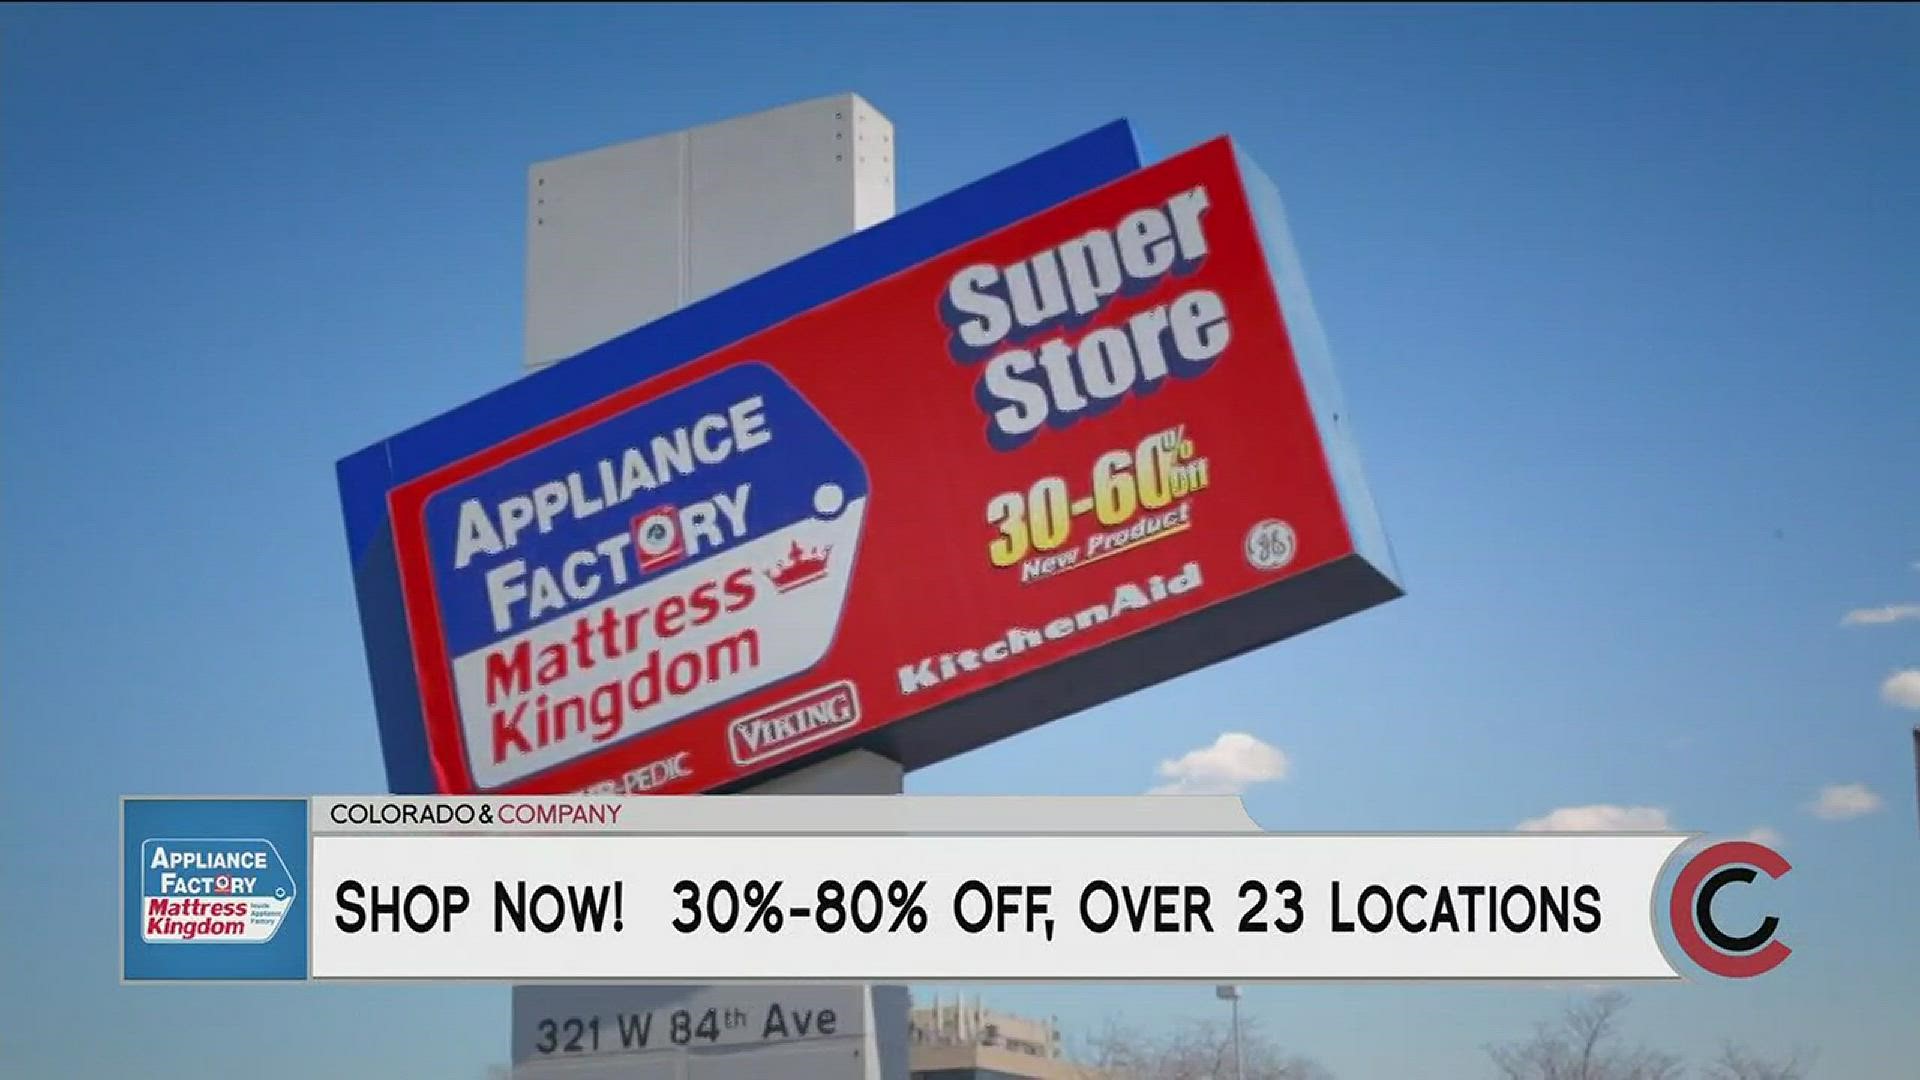 Take advantage of the Thermador floor model clearance sale going on now. Appliance Factory and Mattress Kingdom is the nation’s largest discount appliance and mattress retailer. They have the lowest prices in the Colorado, with thousands of appliances and mattresses for 30% to 50% off.  Shop online www.AppianceFactory.com or any of their 23 locations.